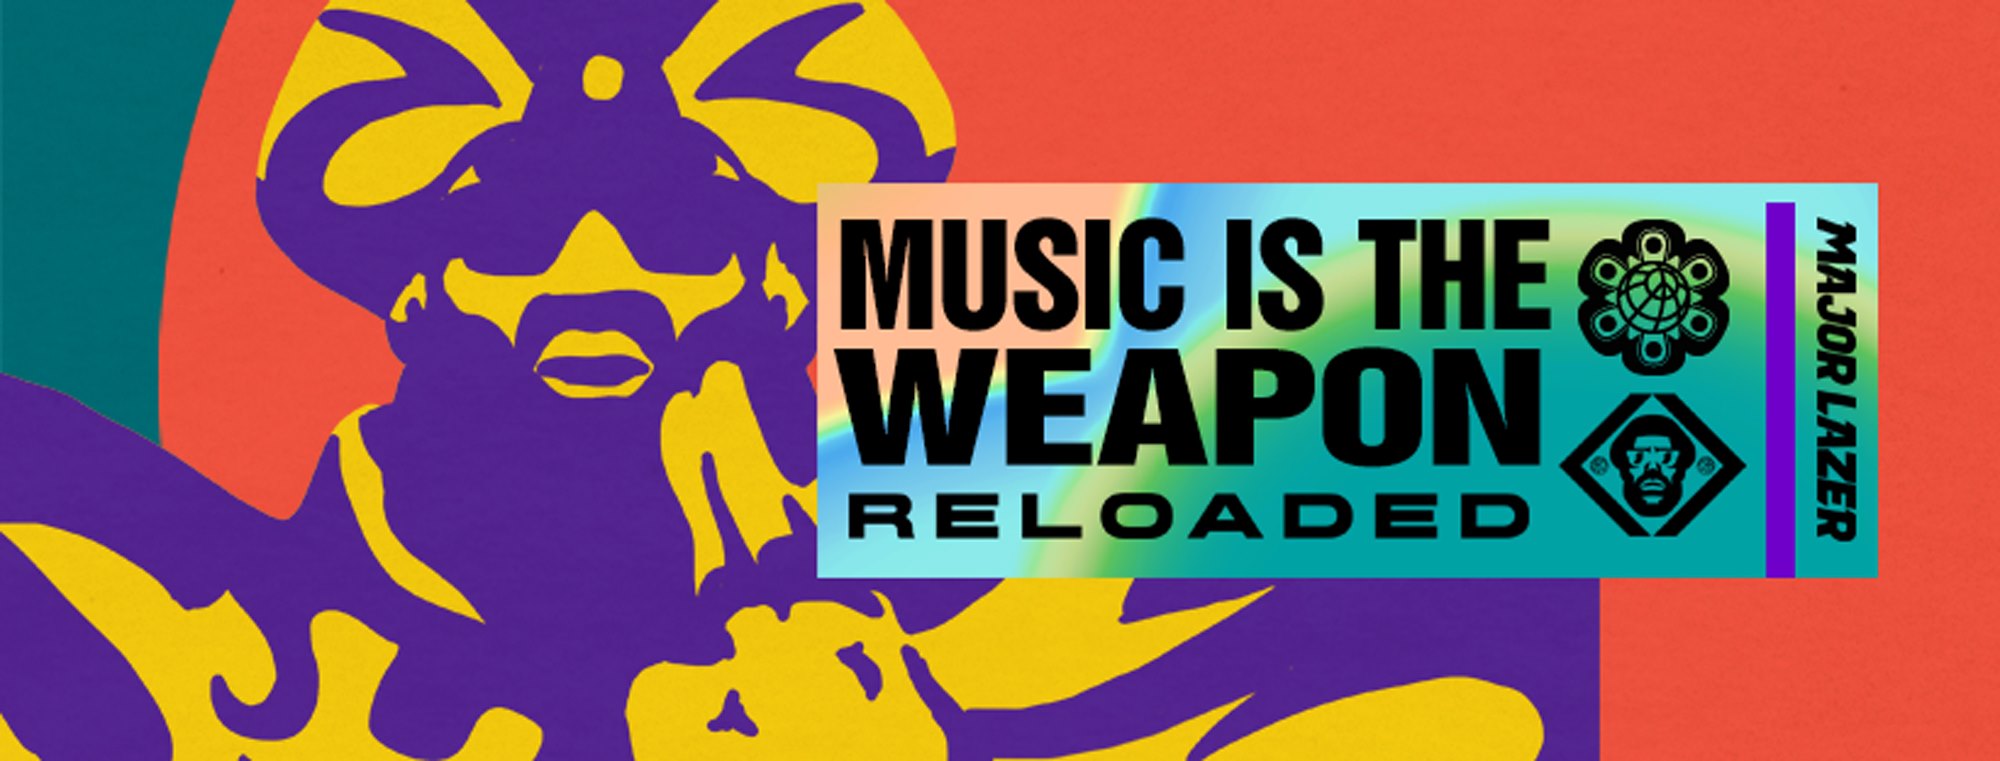 Major Lazer music is the weapon reloaded